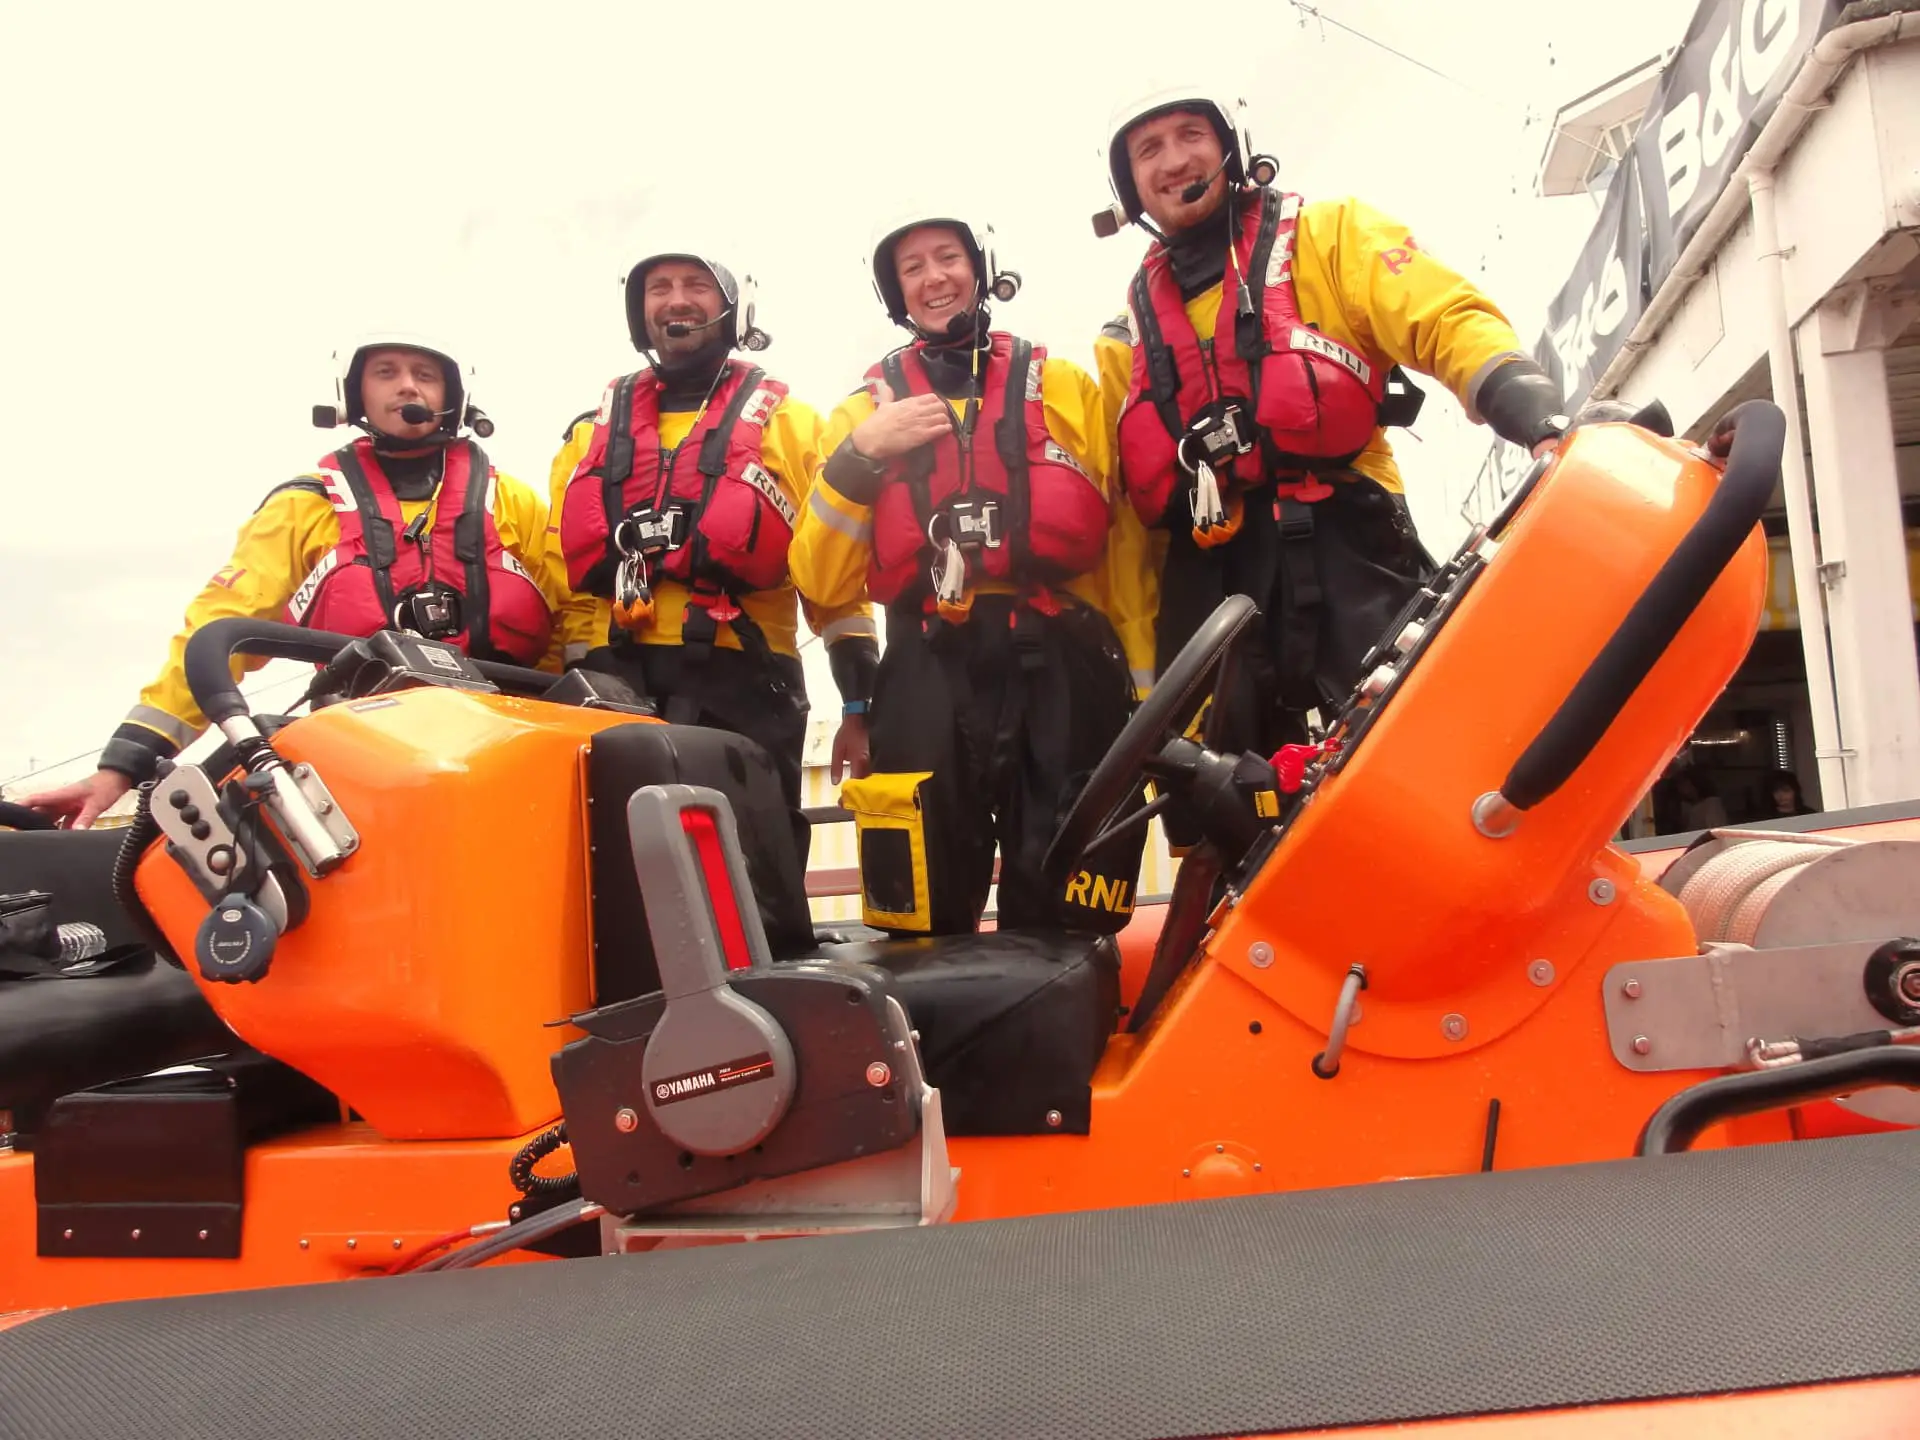 The lifeboat crew on their return to the station (left to right): Matt Glenn, Jack Banks, Libby Finch, and Myles Hussey.